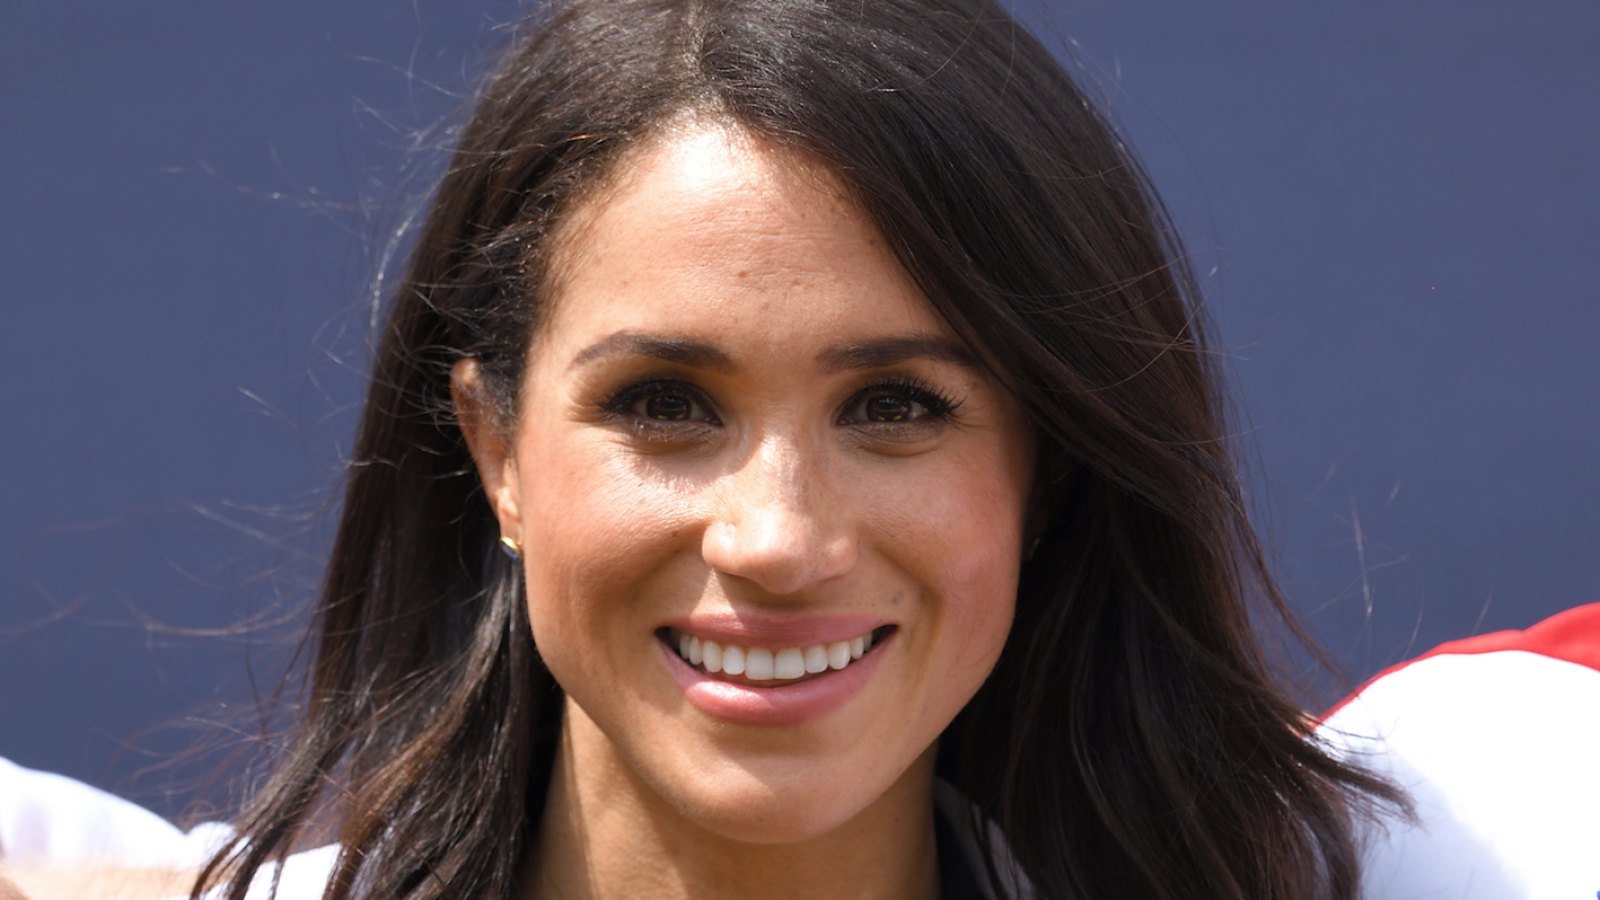 Pregnant Duchess Meghan skipped an event at the Invictus Games